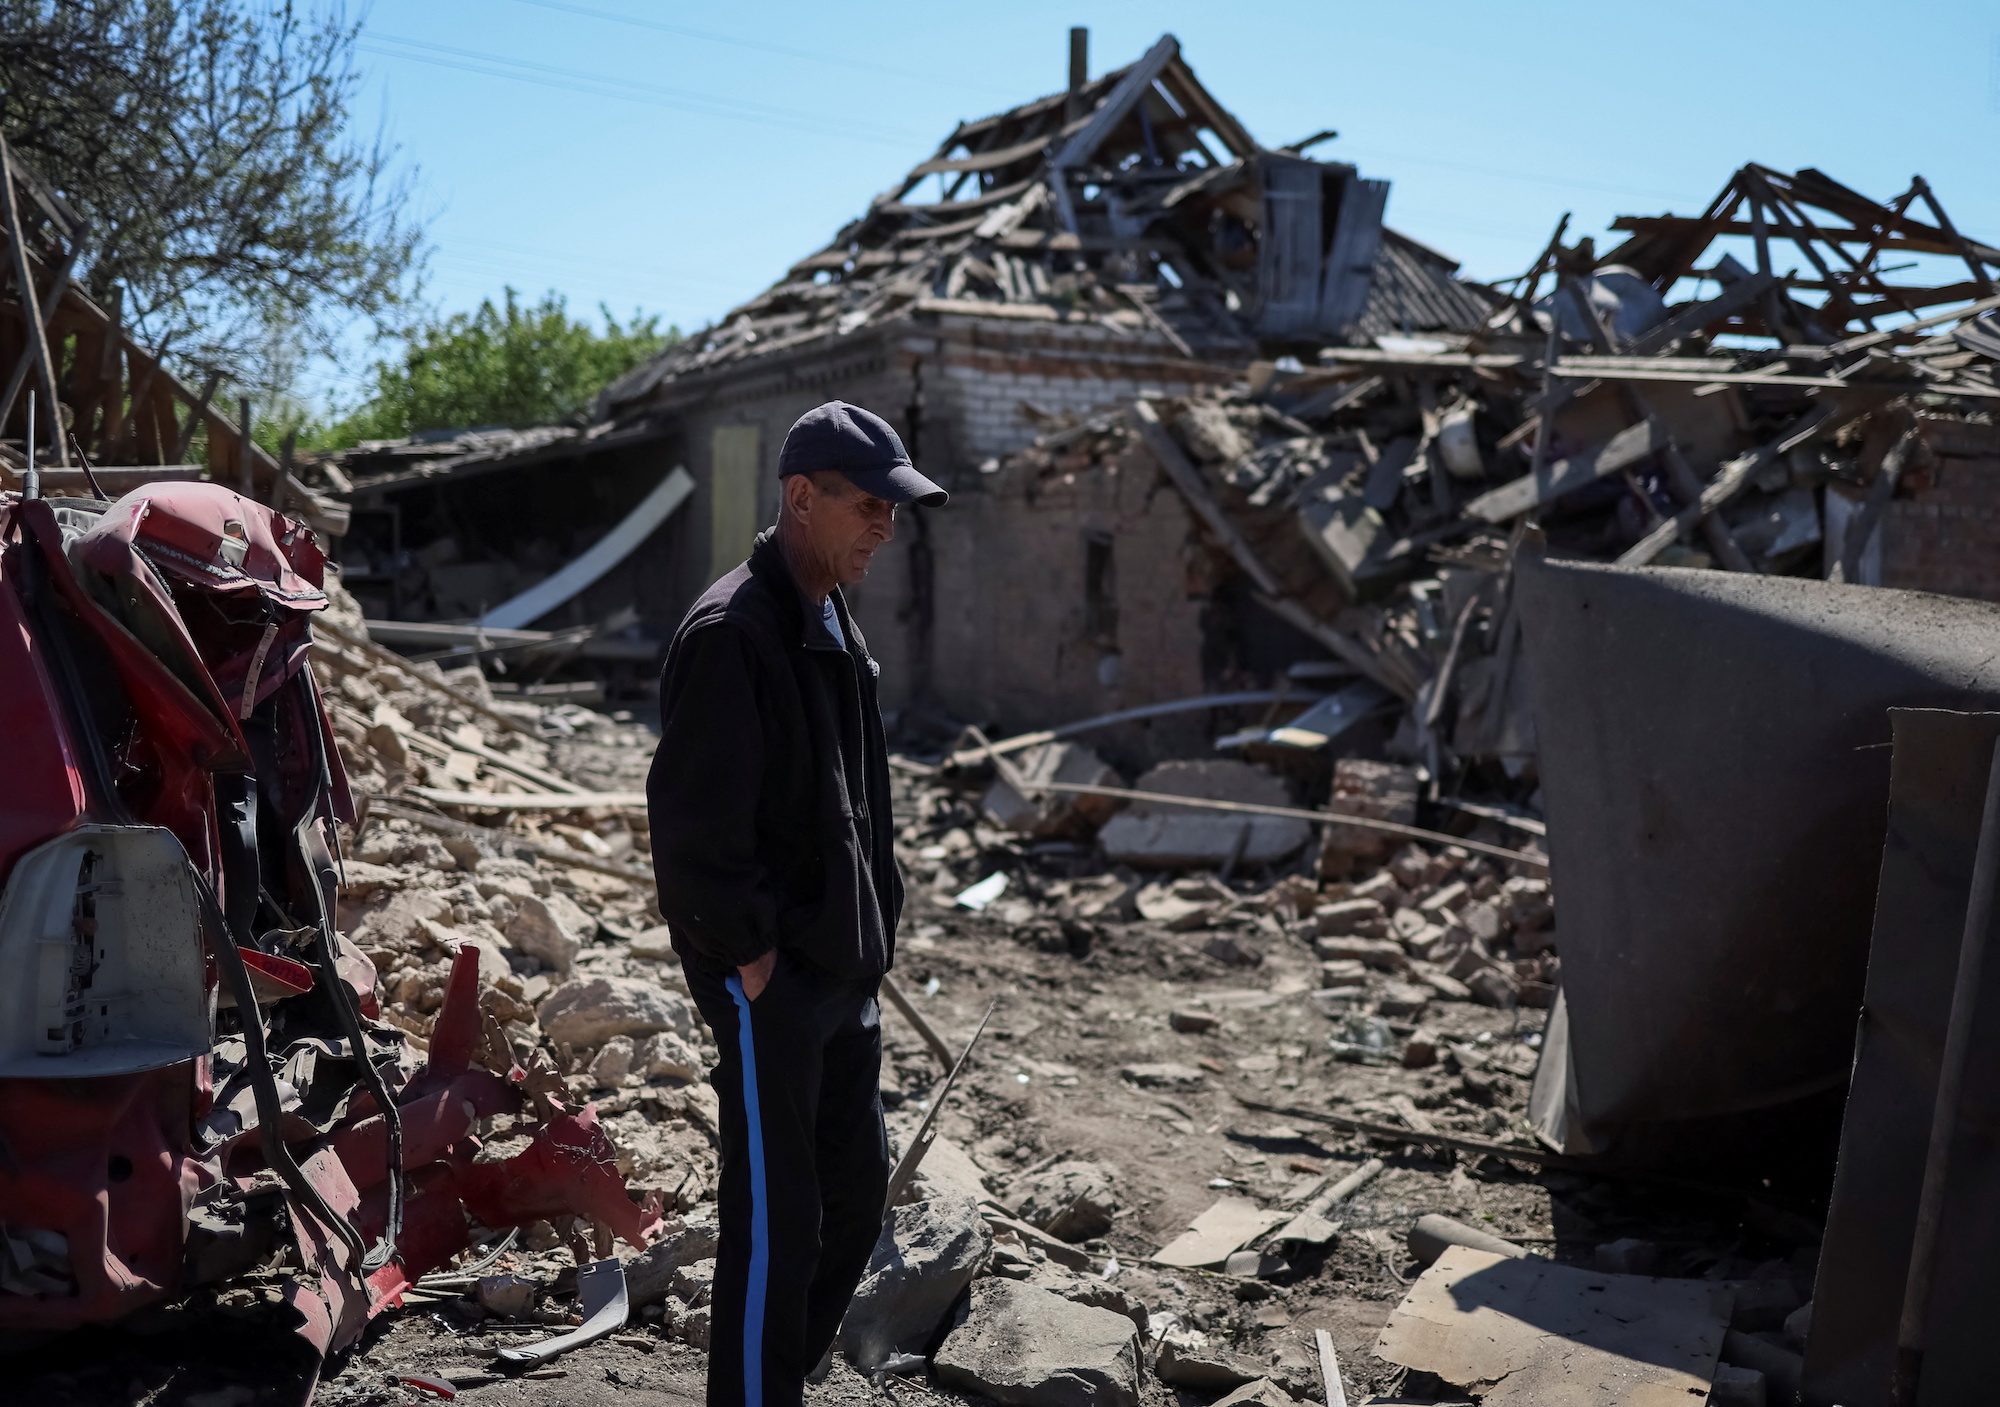 Ukraine seeks evacuation of wounded fighters as war rages on